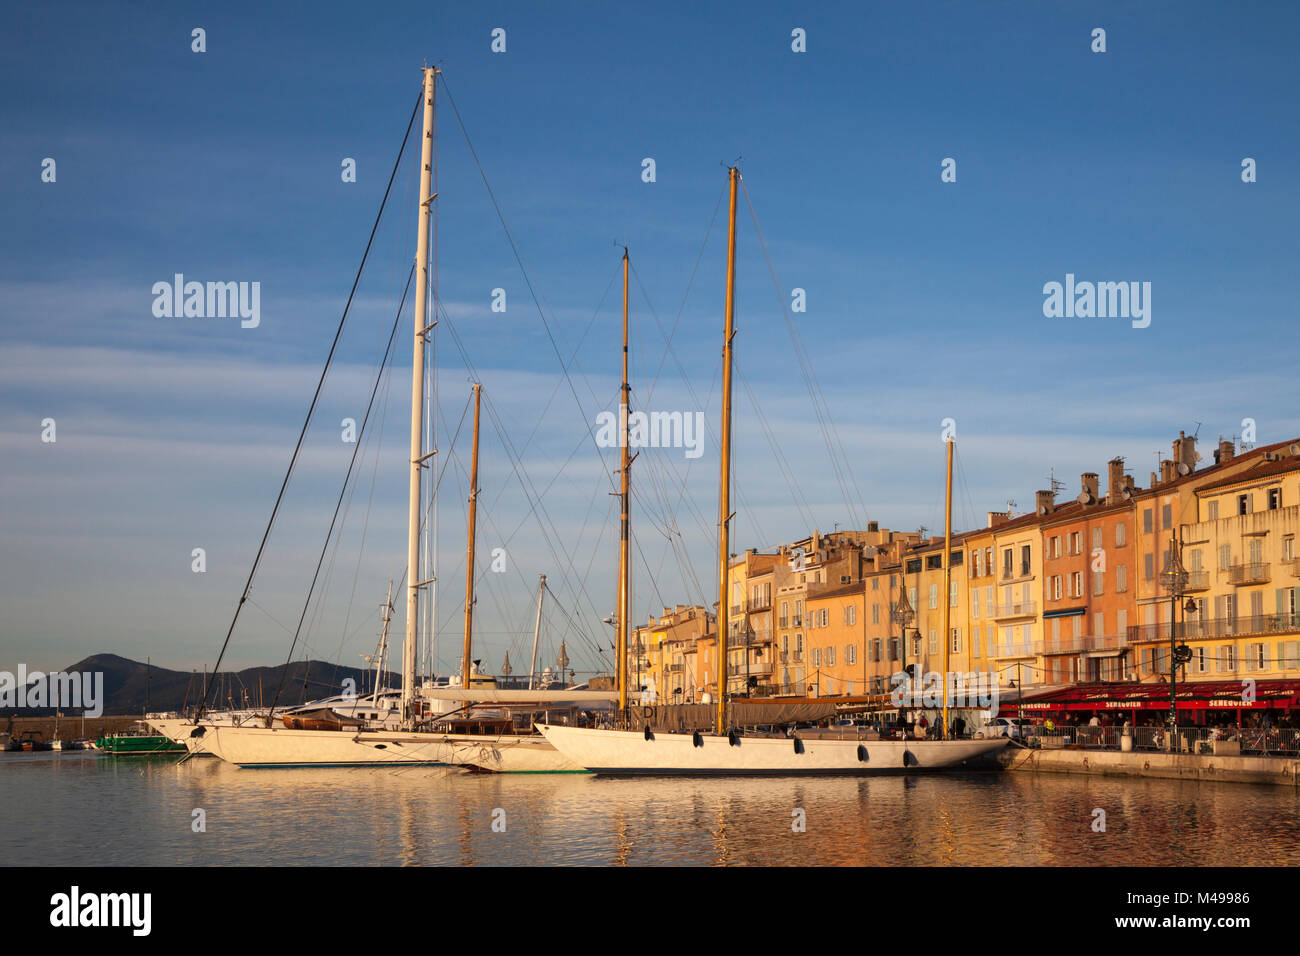 Yaghts and old houses at the port of Saint-Tropez. Location: Var ...